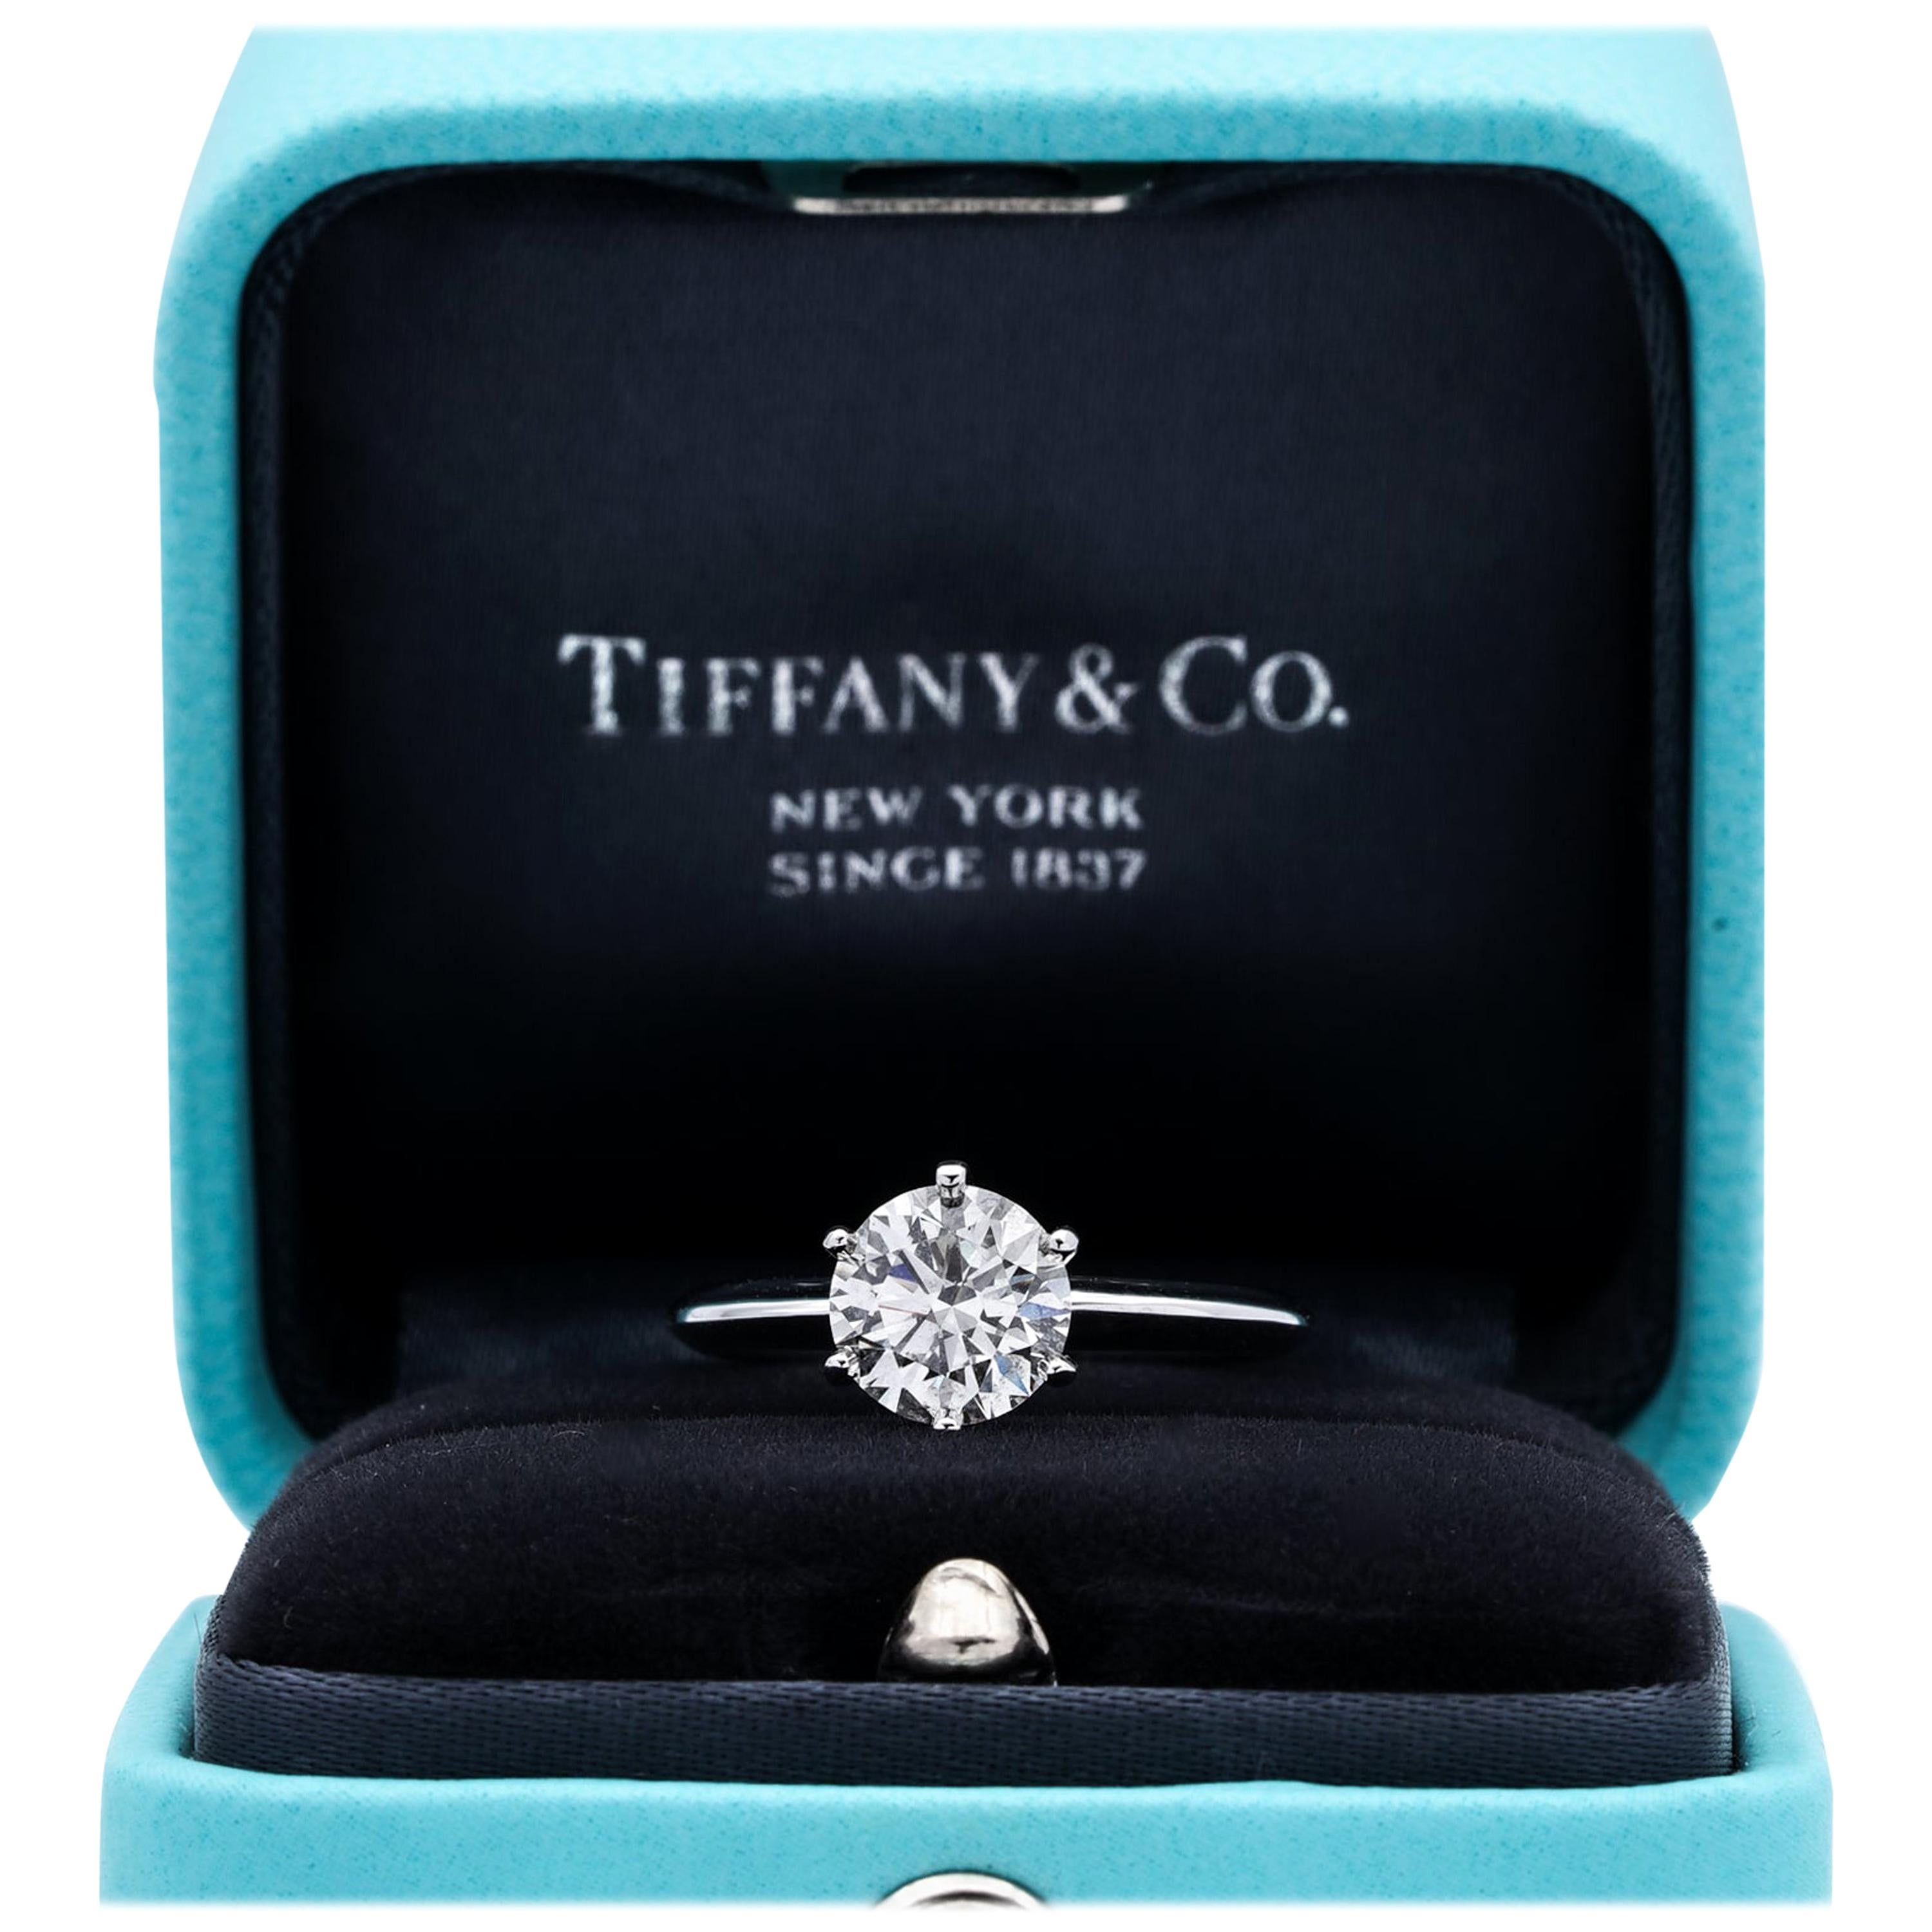 2nd hand tiffany engagement rings